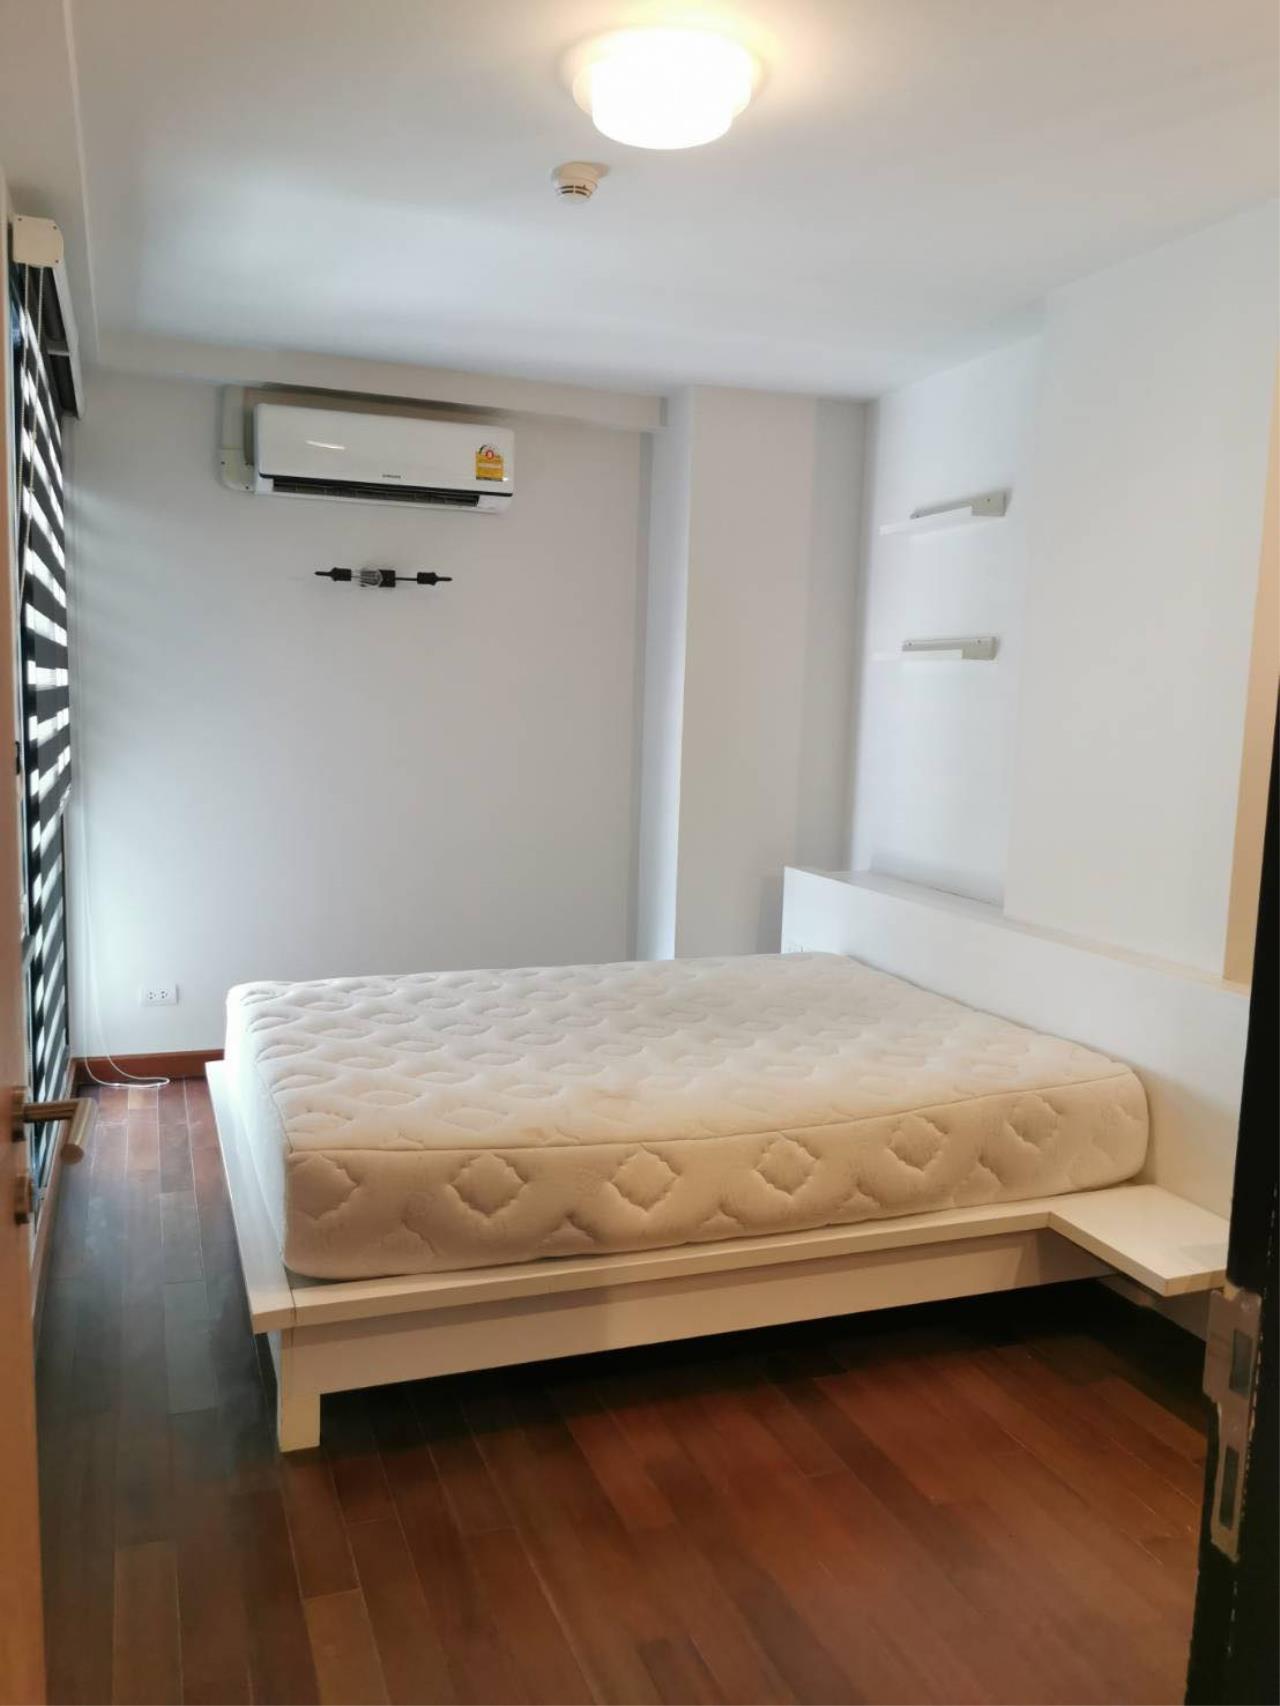 Kwankhao Kathinthong Agency's CONDO FOR SALE - Le Cote Thonglor 8, 1 Bedroom, 5.6 MB. 6